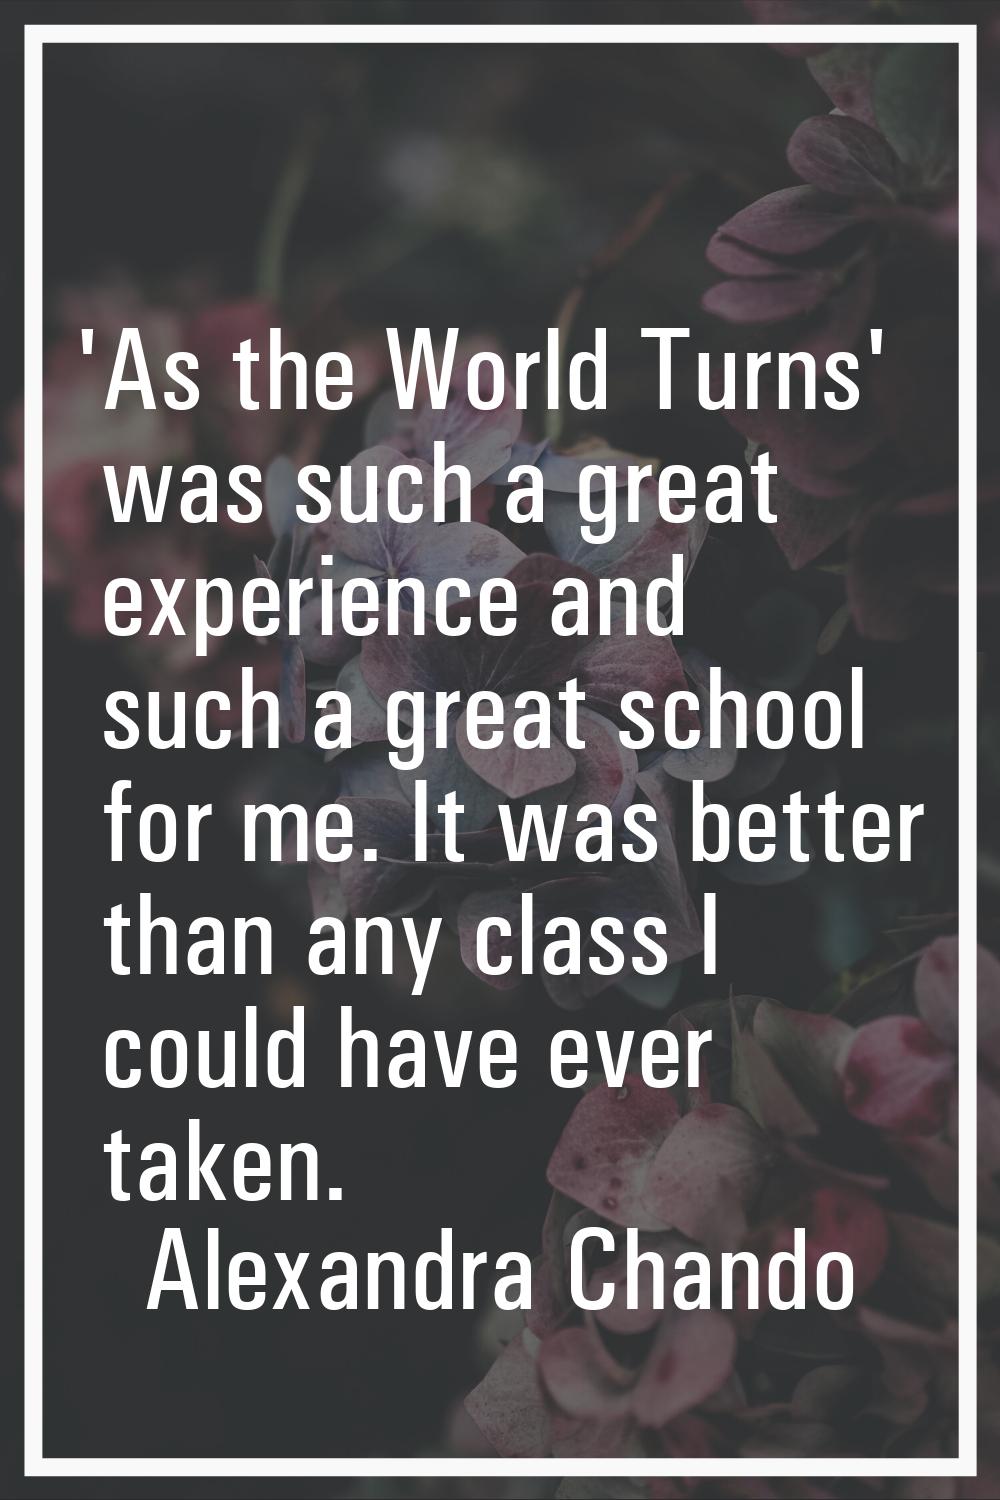 'As the World Turns' was such a great experience and such a great school for me. It was better than